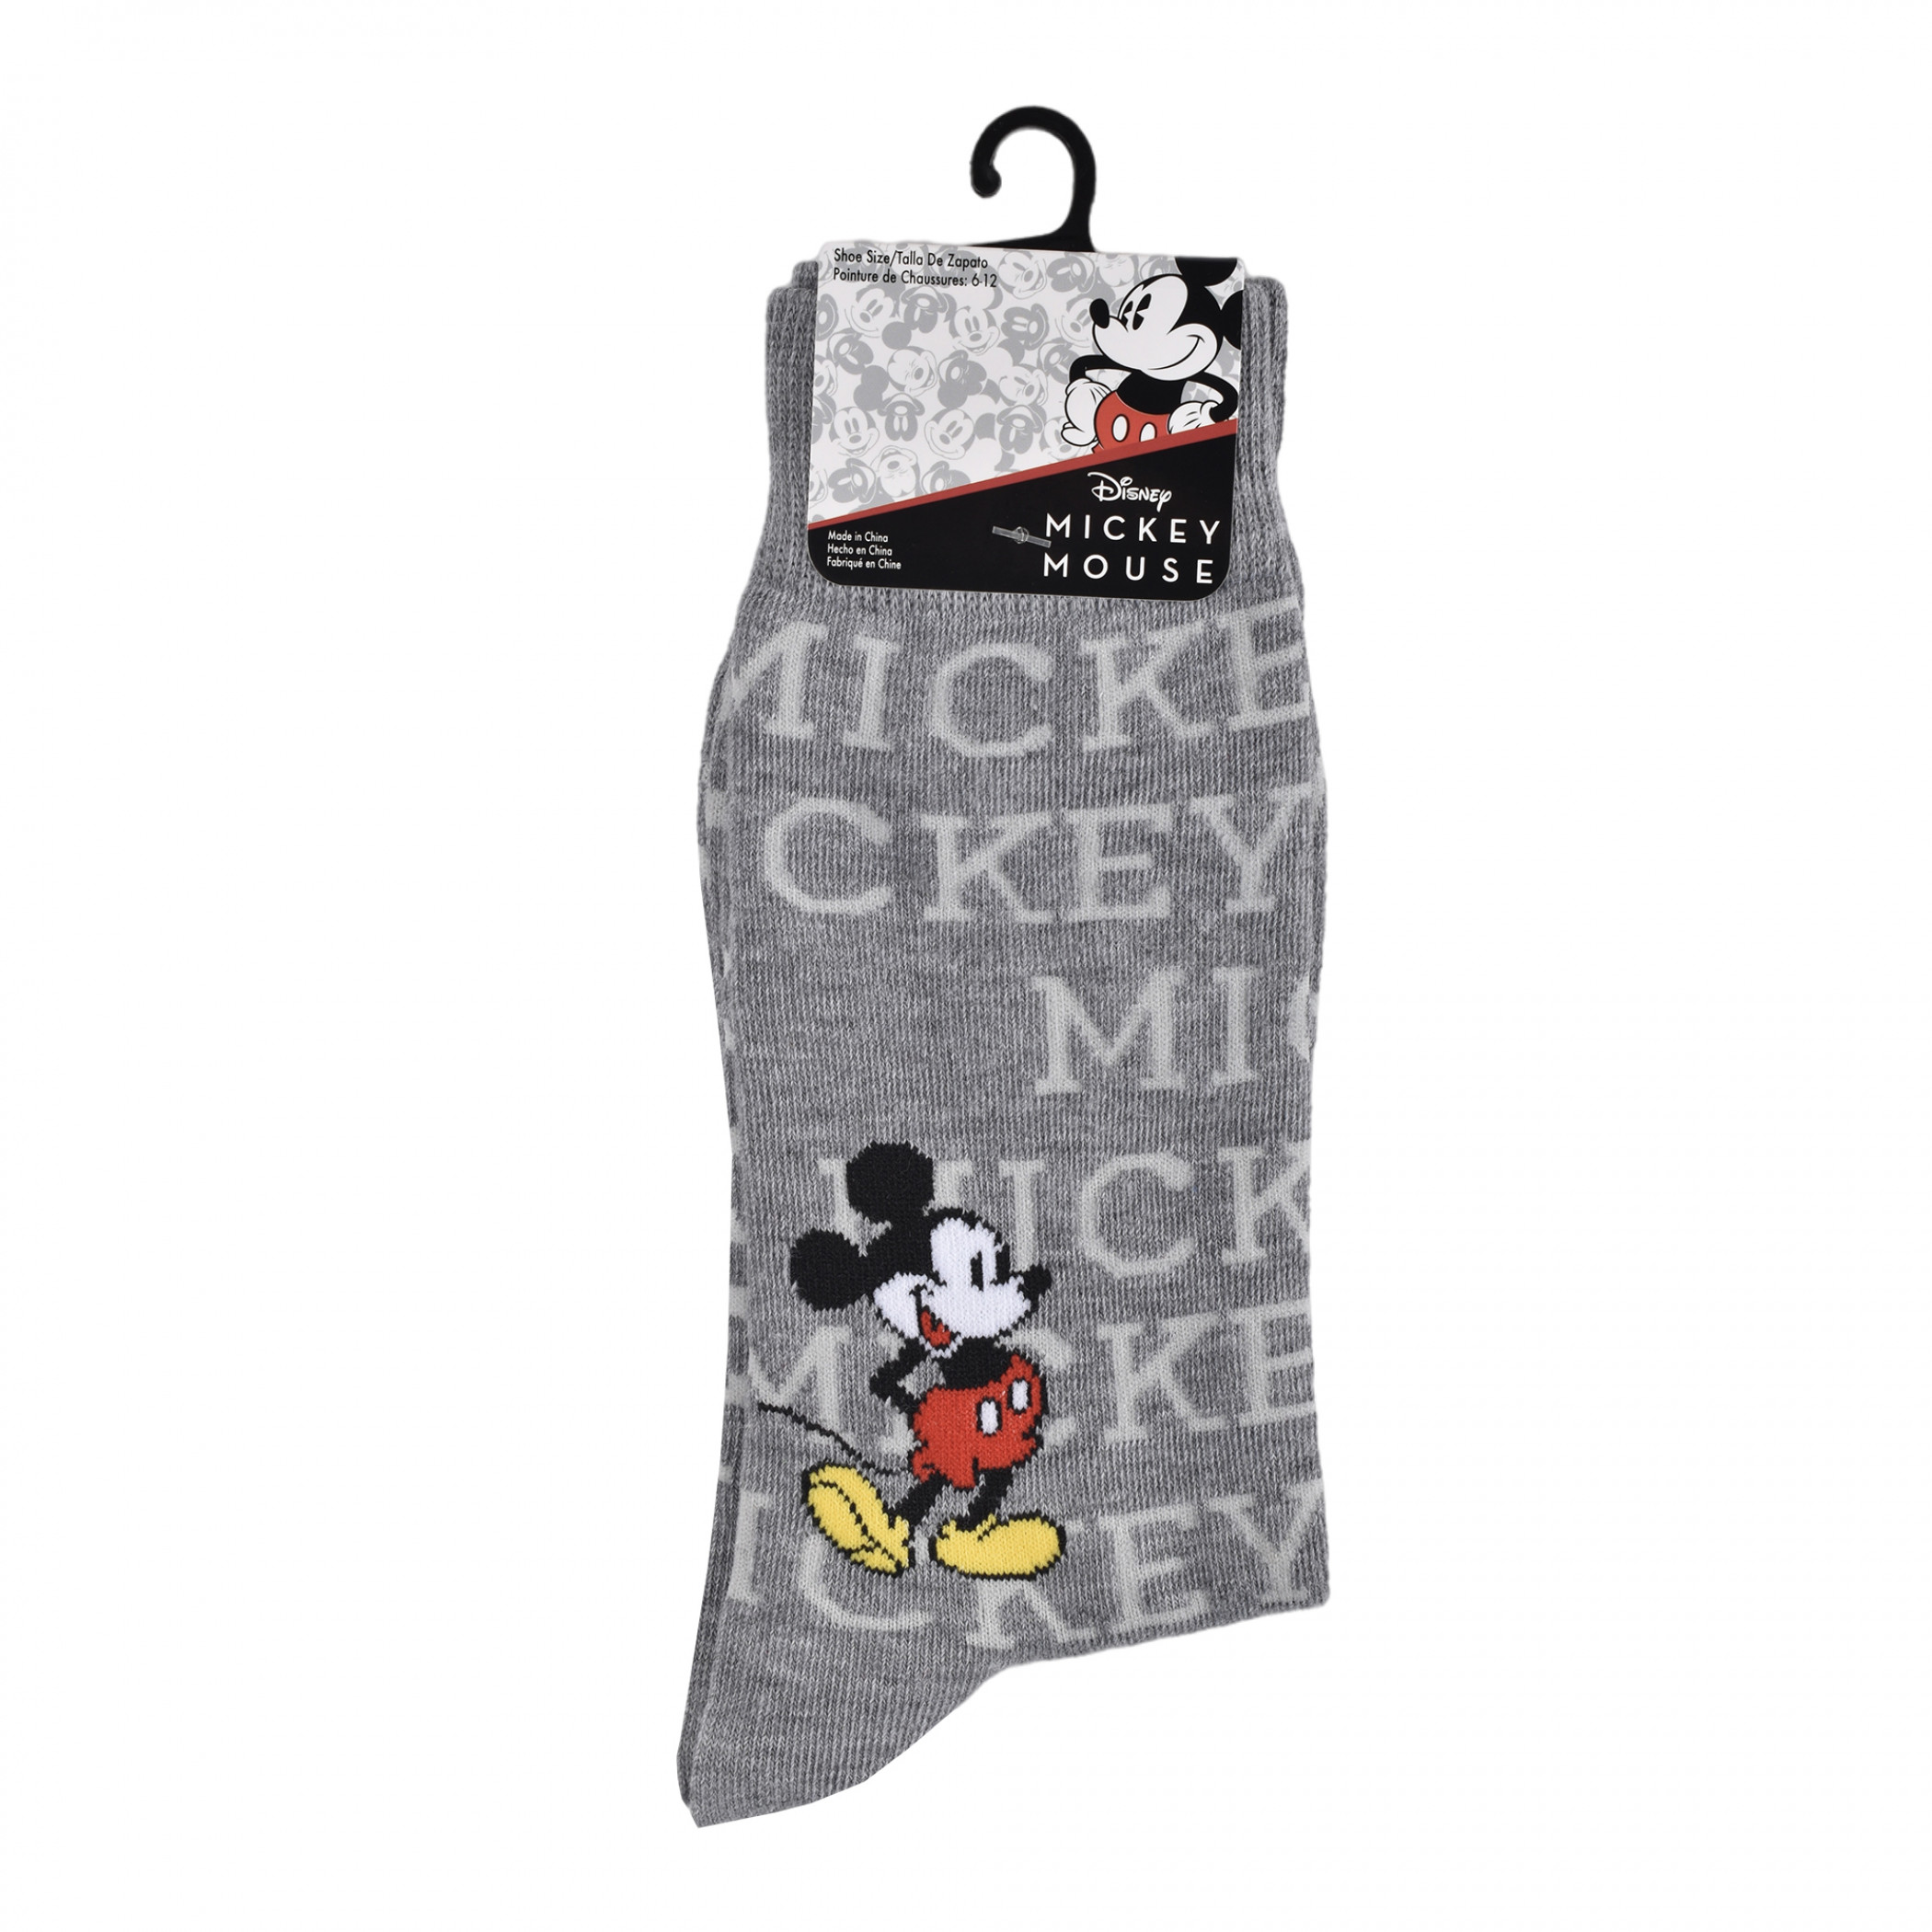 Disney Mickey Mouse Mismatched Crew Socks 2-Pair Pack